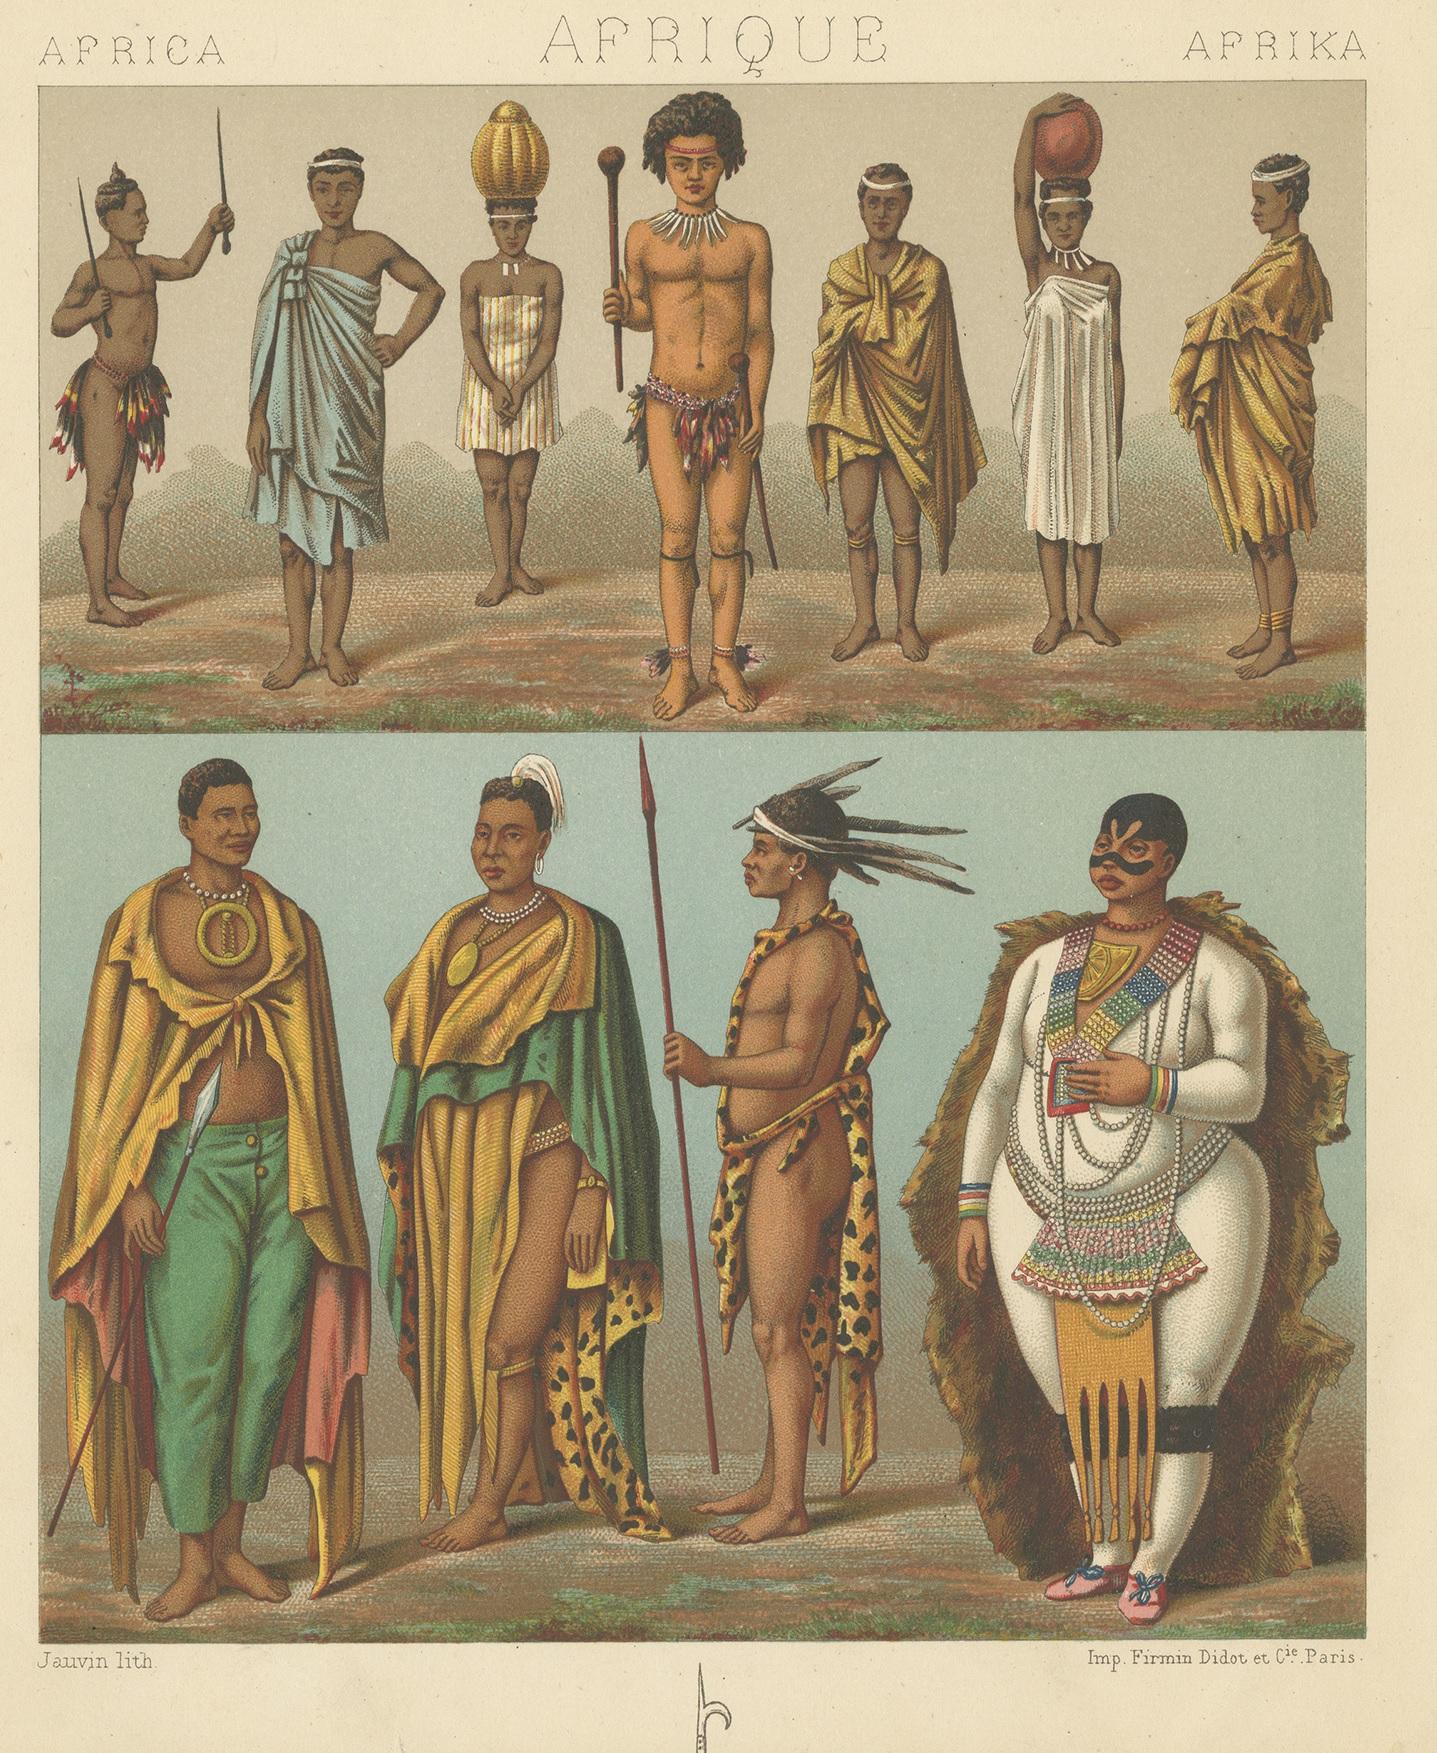 Antique print titled 'Africa - Afrique - Afrika'. Lithograph of South African tribes. This print originates from 'Le Costume Historique (..)' by A. Racinet.